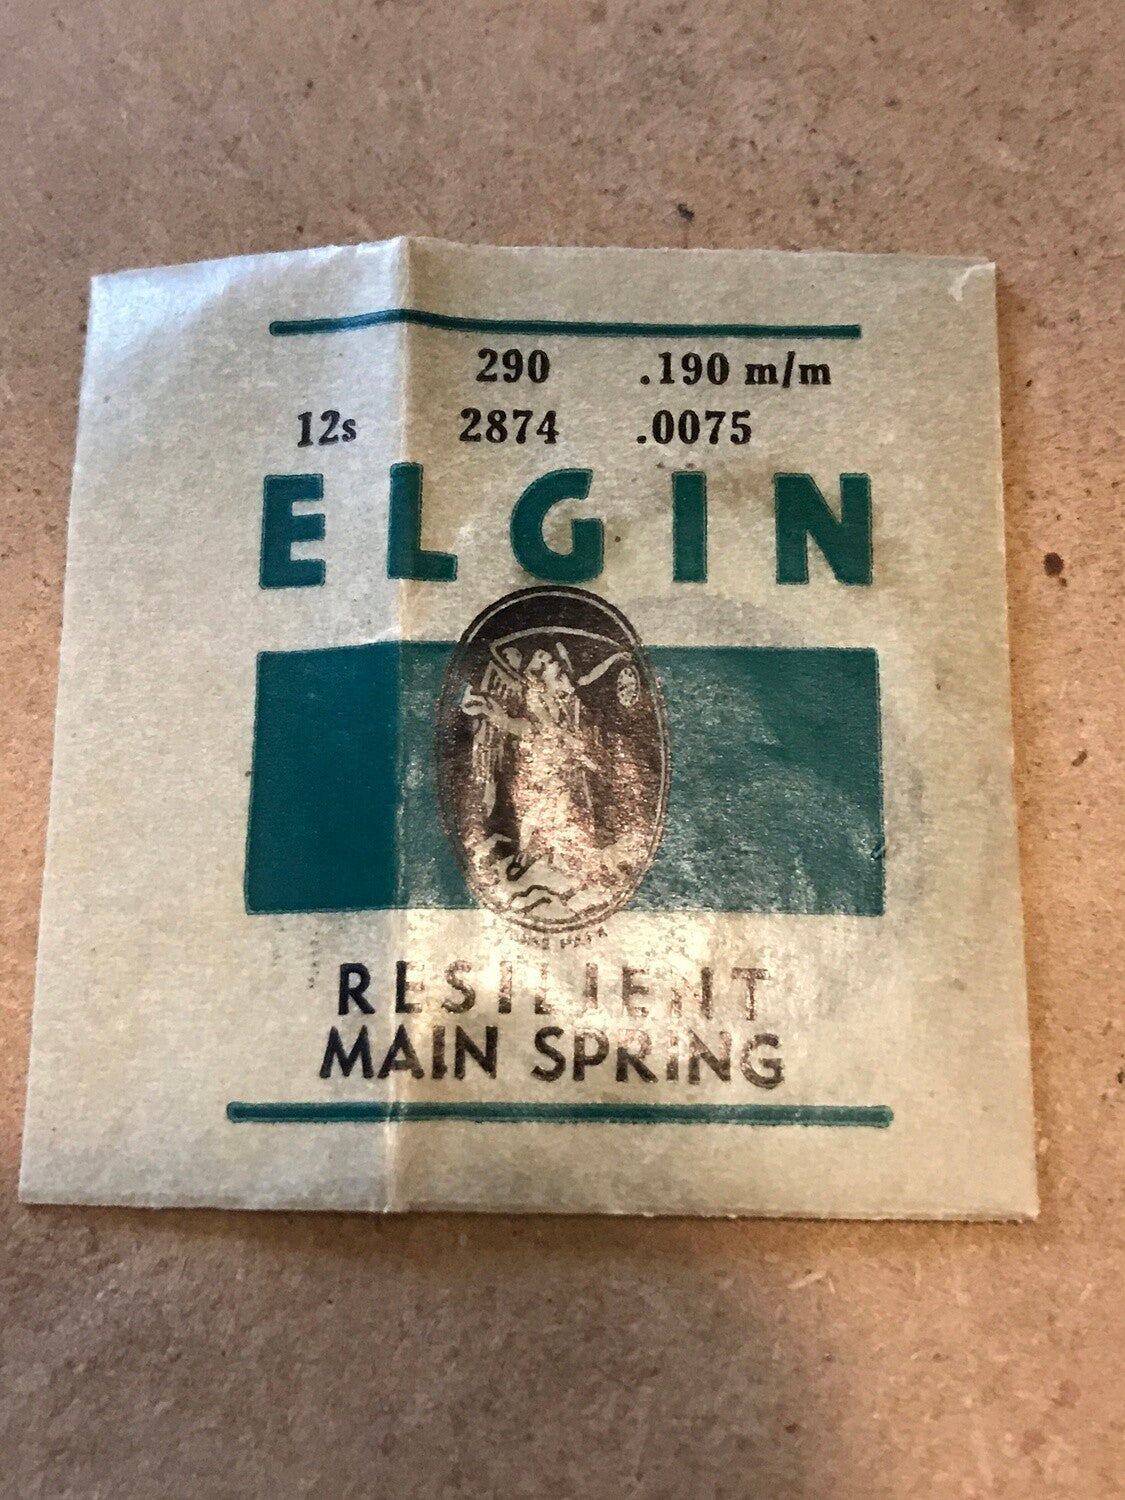 Elgin Factory Mainspring for 12s No. 2874 - Steel